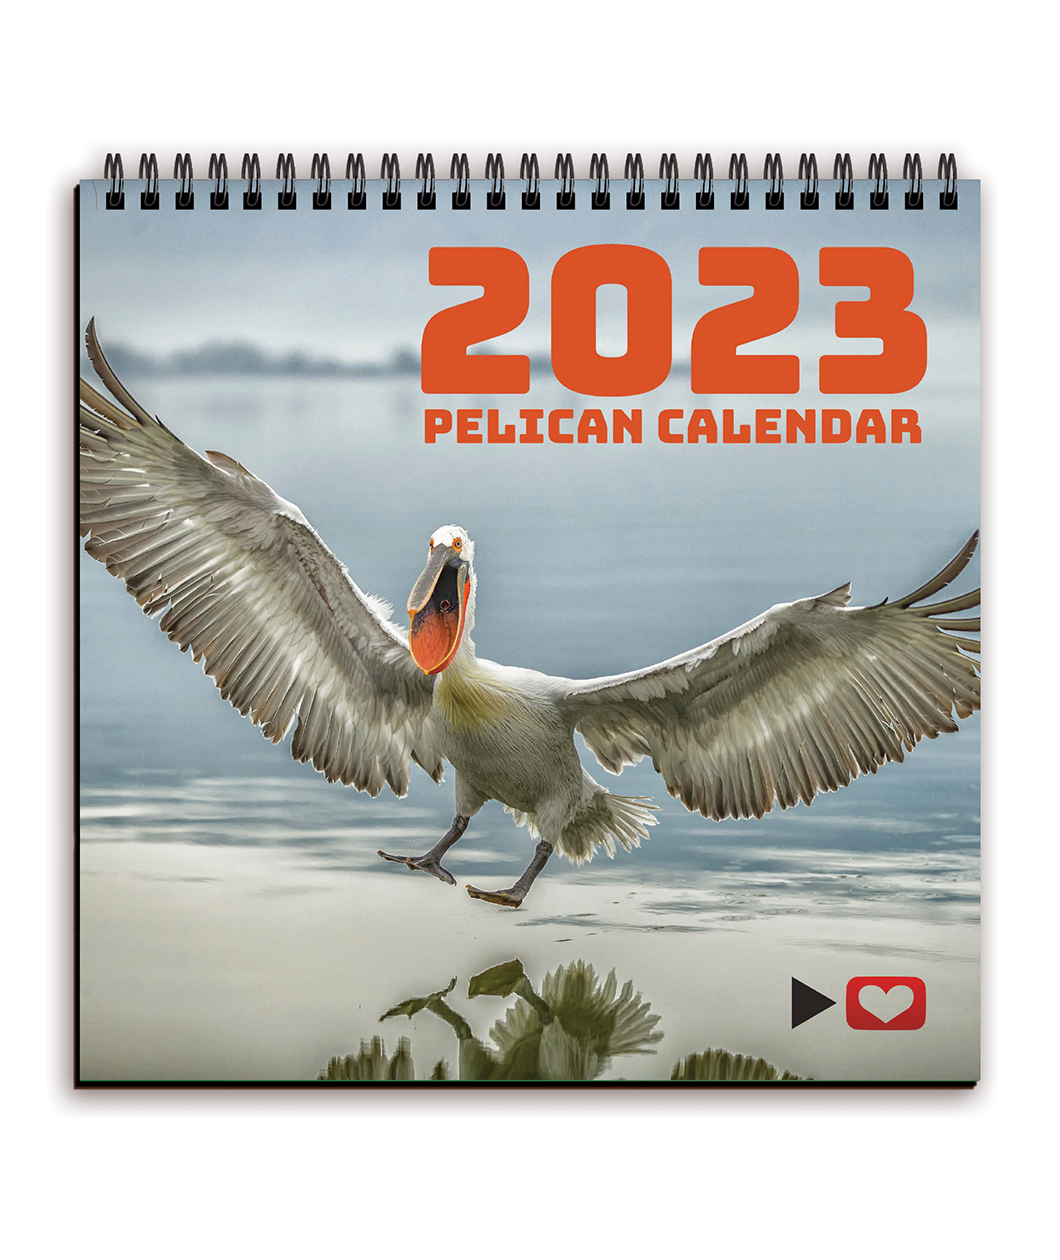 The cover of the Project for Awesome calendar showing a pelican about to land on the water. The text reads 